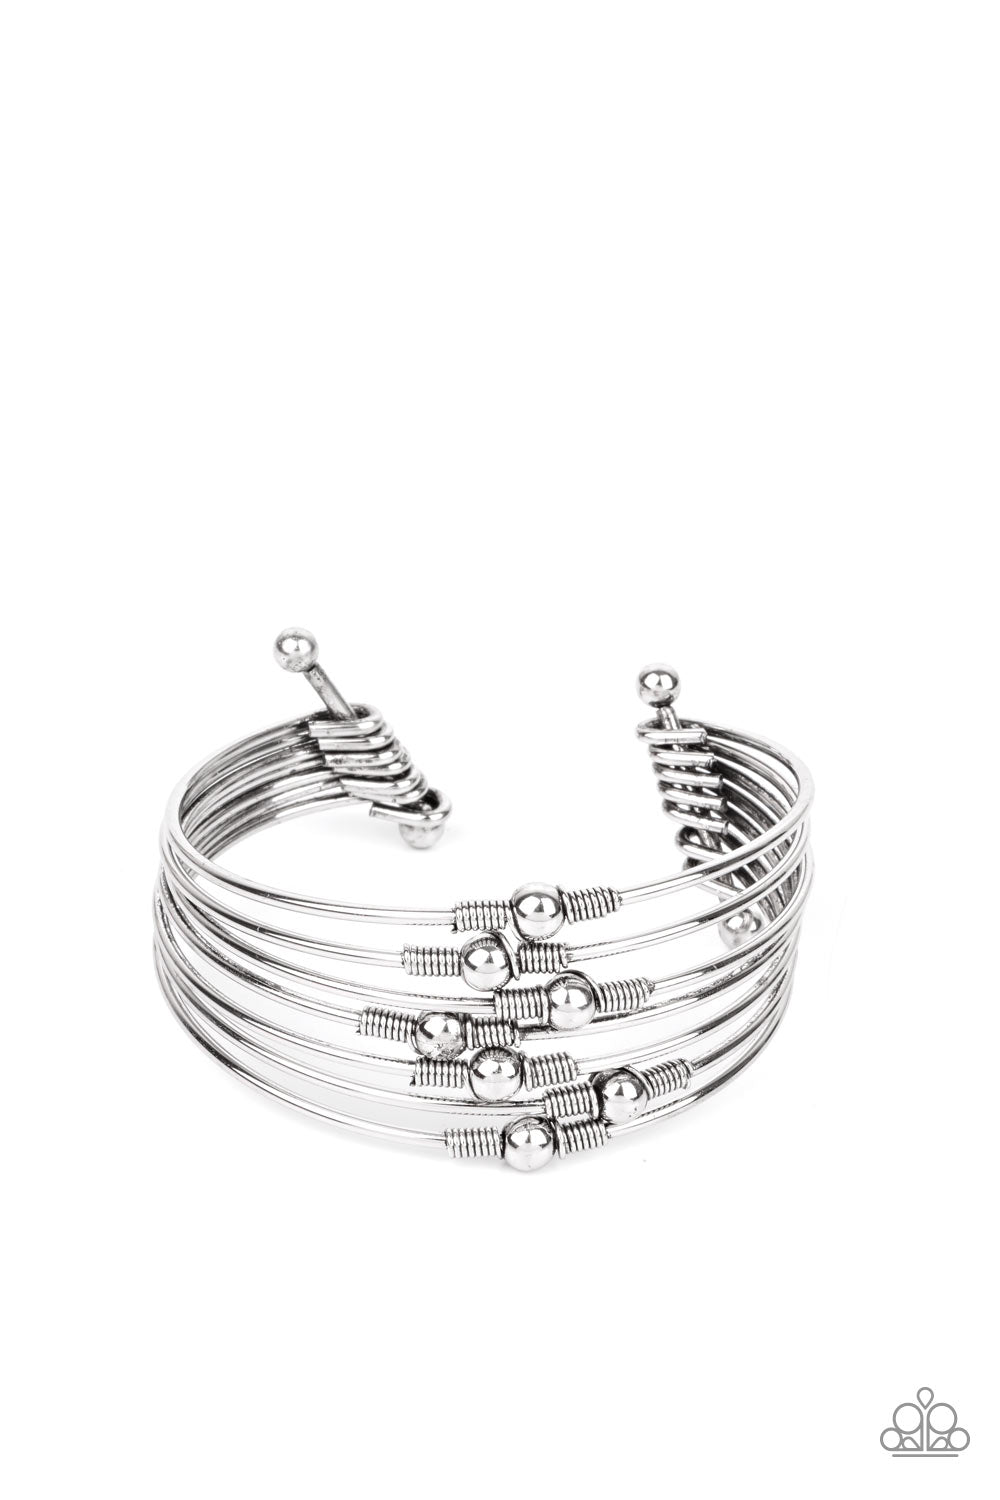 Industrial Intricacies - Silver Cuff Bracelets held in place by silver wire fittings, classic silver beads haphazardly dot dainty silver bars that connect into a layered cuff around the wrist.  Sold as one individual bracelet.